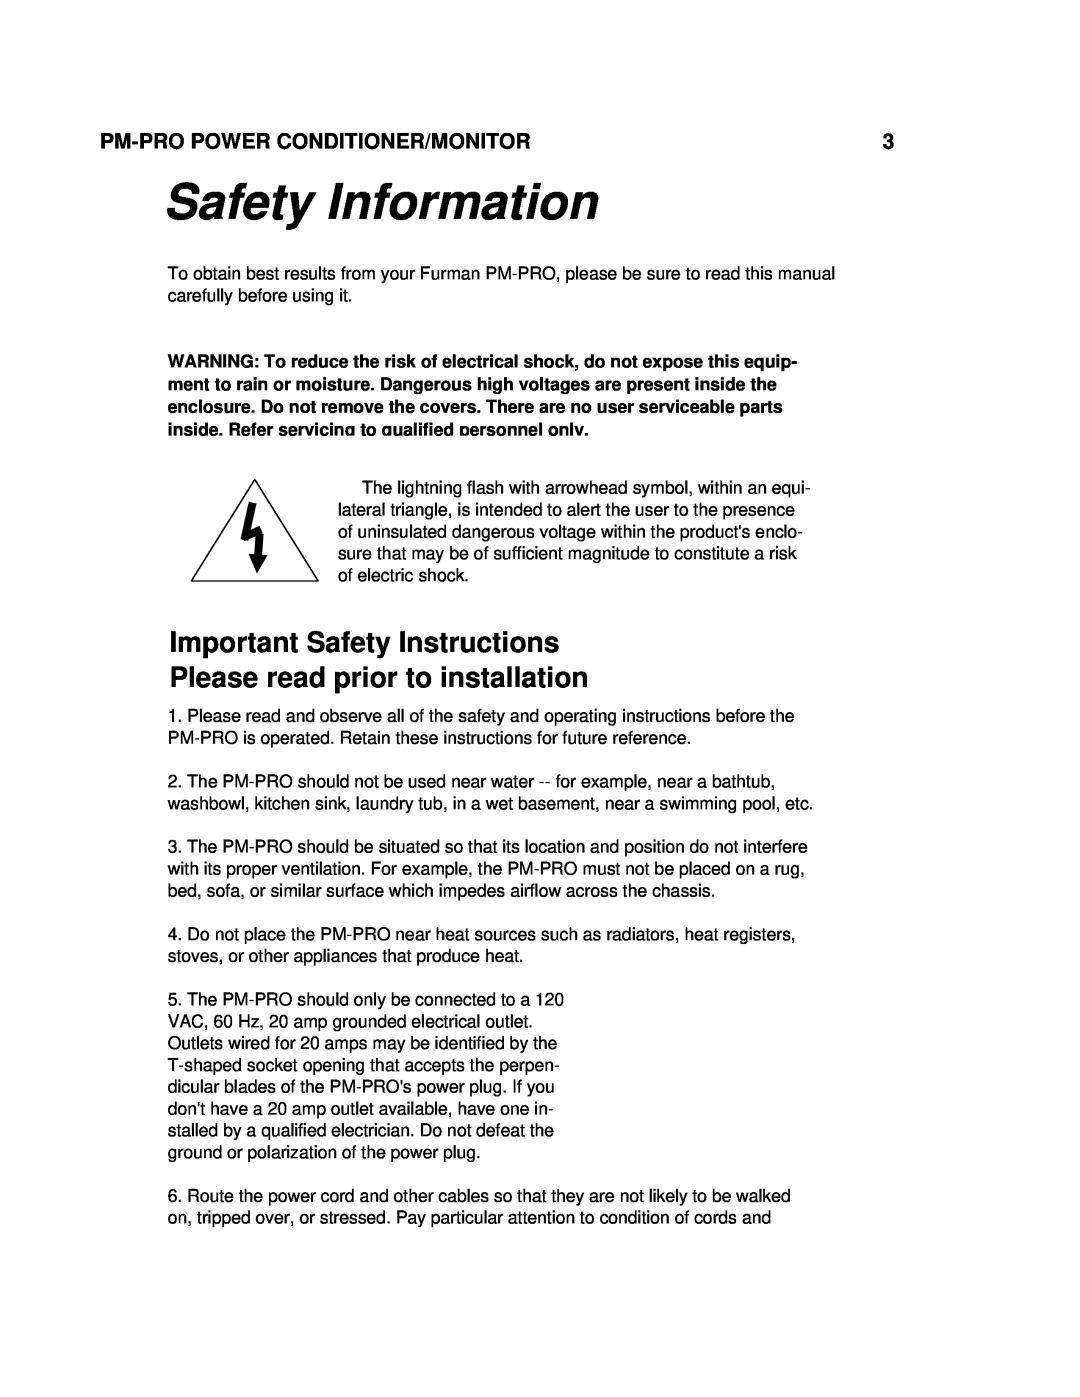 Furman Sound PM-PRO-E owner manual Safety Information, Important Safety Instructions Please read prior to installation 